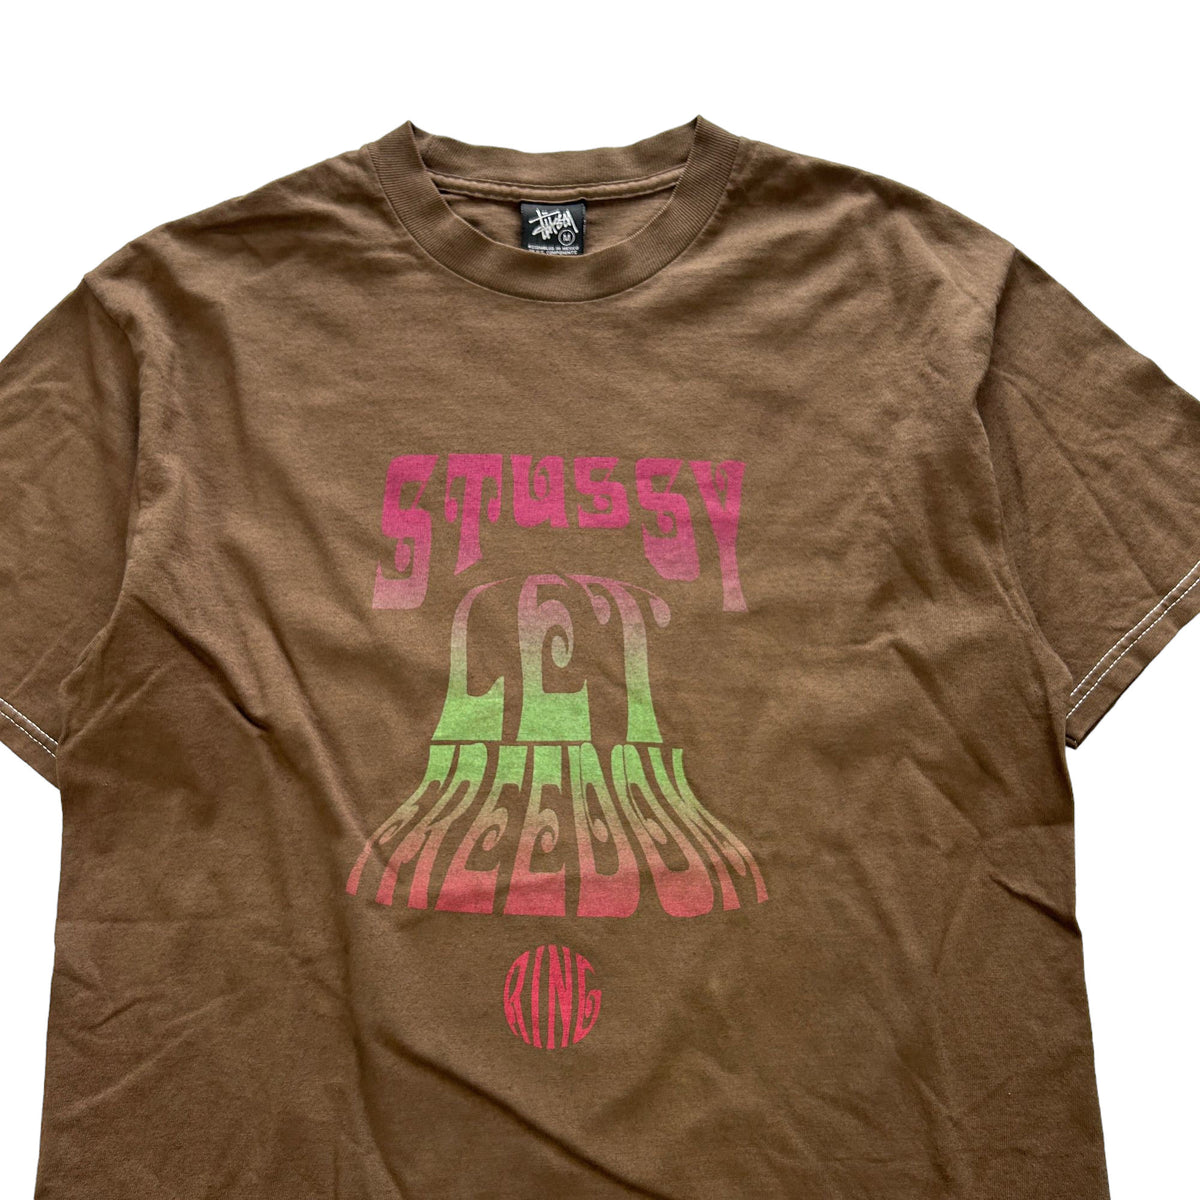 Vintage Stussy Let Freedom Ring Graphic T-Shirt Size M